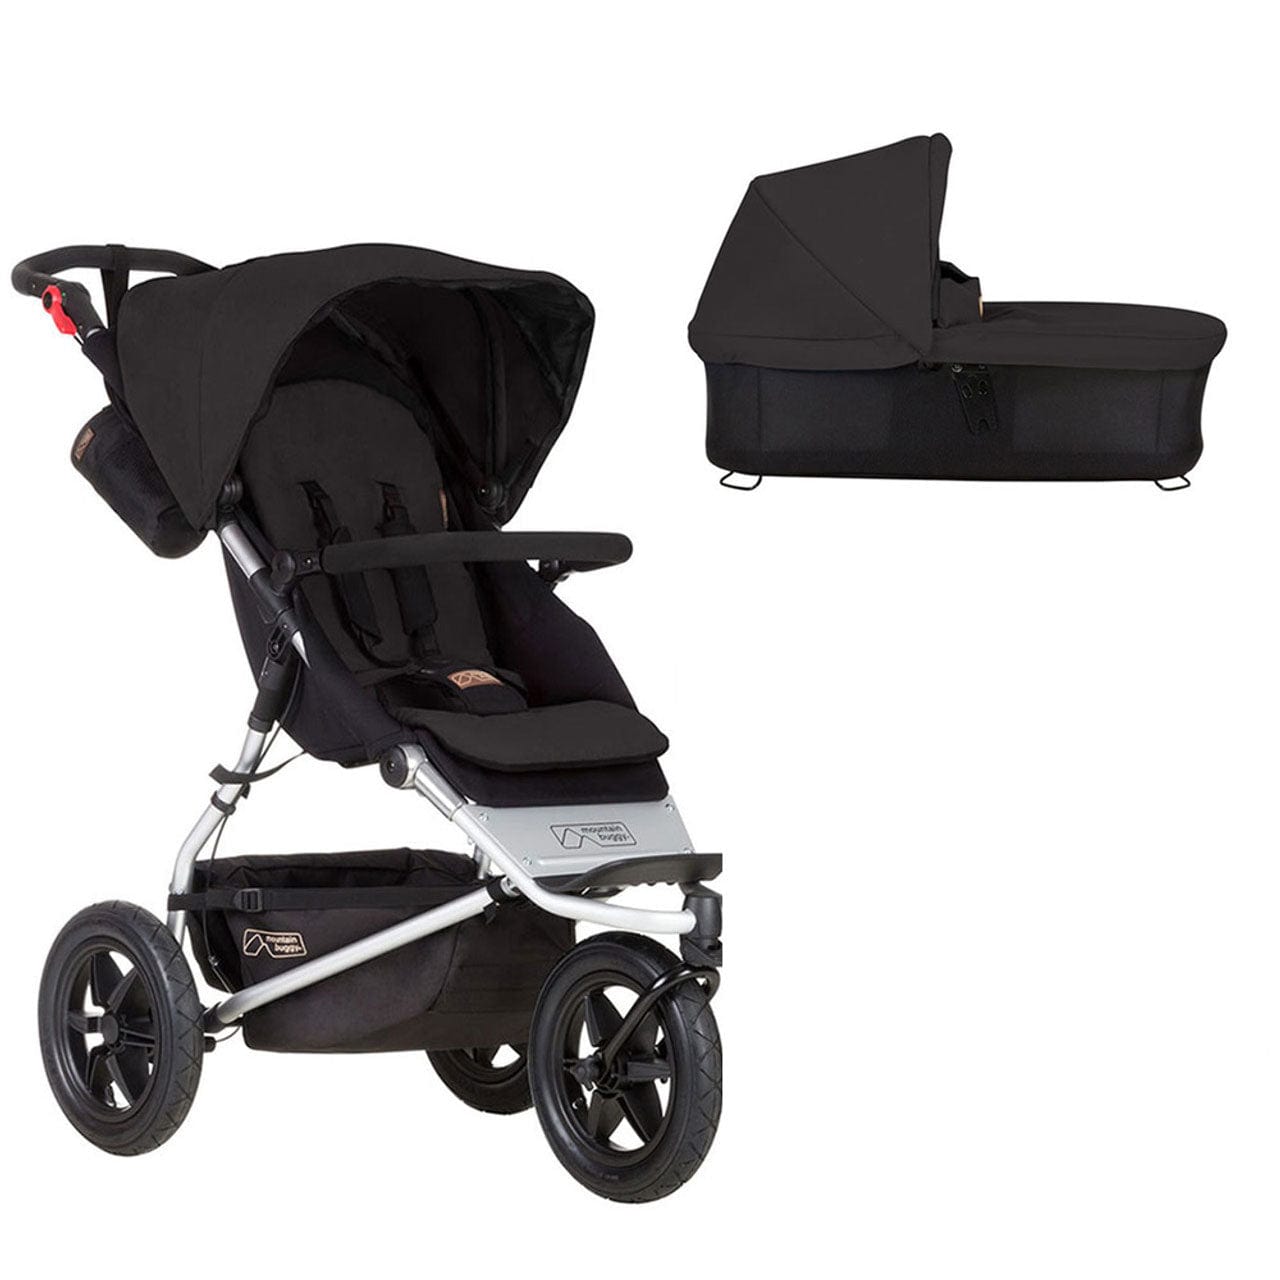 Mountain Buggy Baby Strollers Mountain Buggy Urban Jungle Pushchair with Free Carrycot - Black 12203-BLK